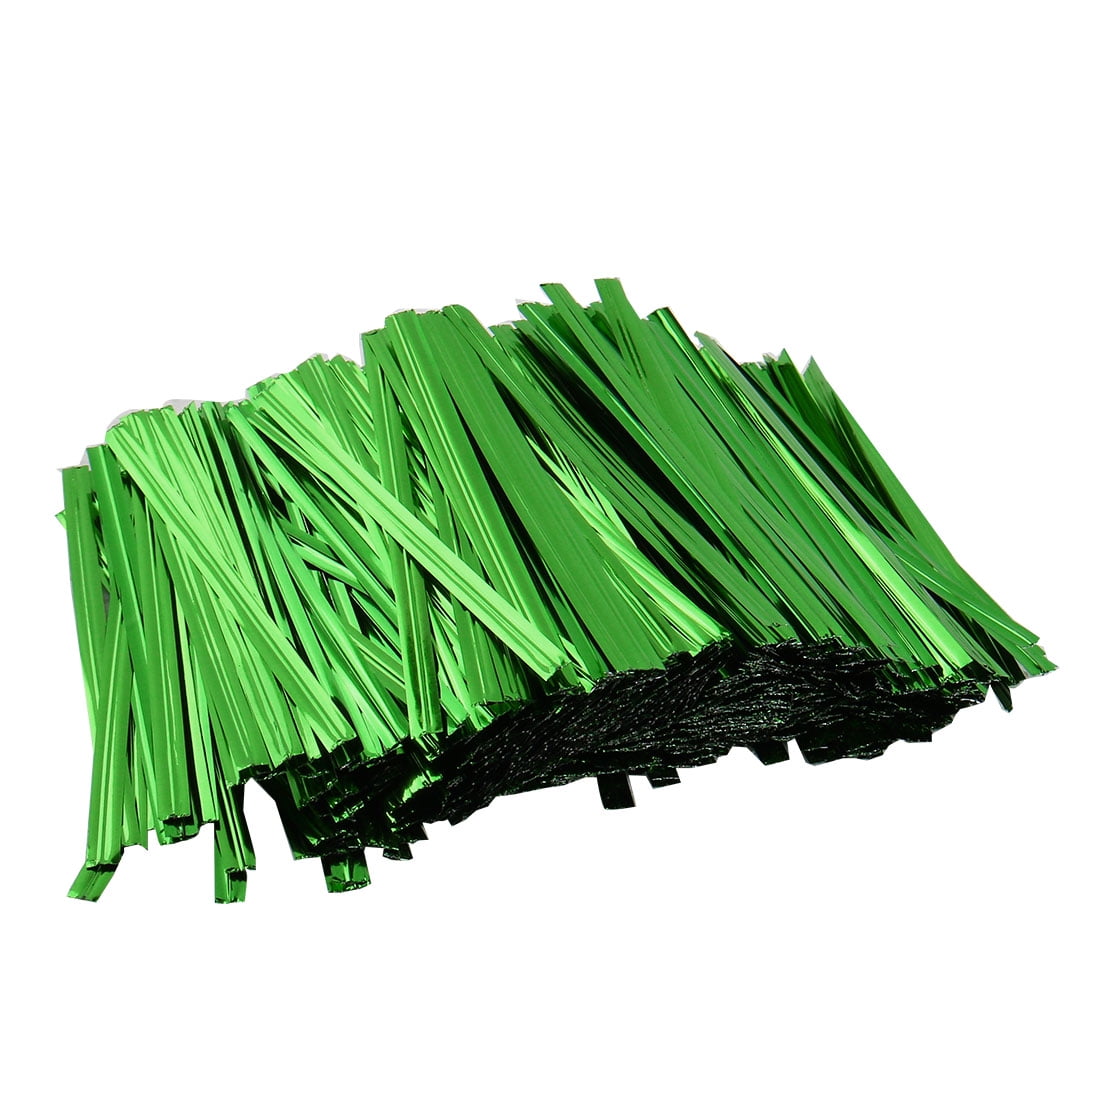 1600 Pcs Green 8cm Length Candy Bread Bags Packaging Twist Cable Tie ...